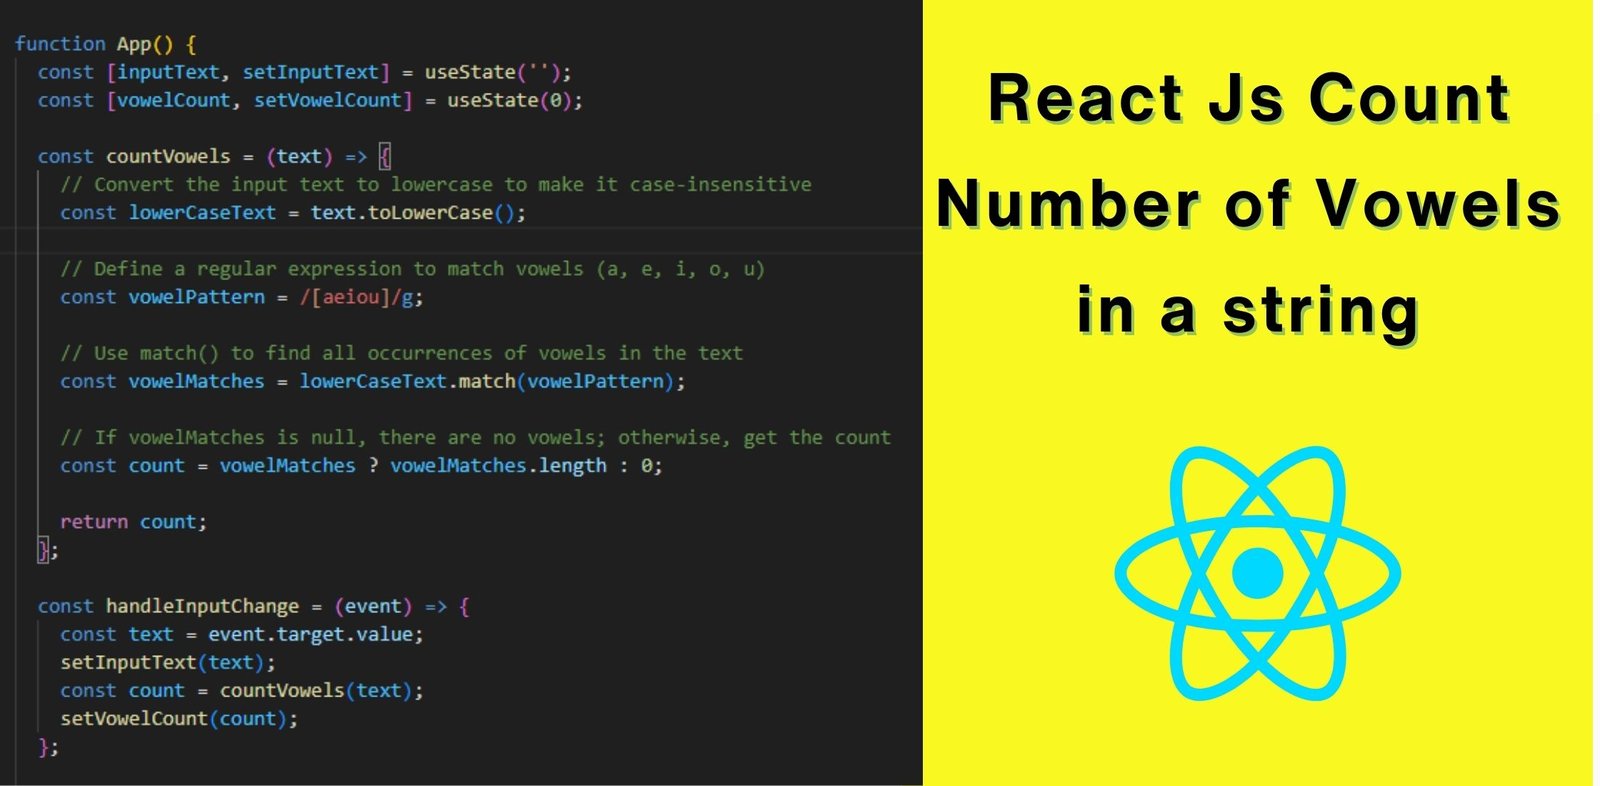 React Js Count Number of Vowels in a string